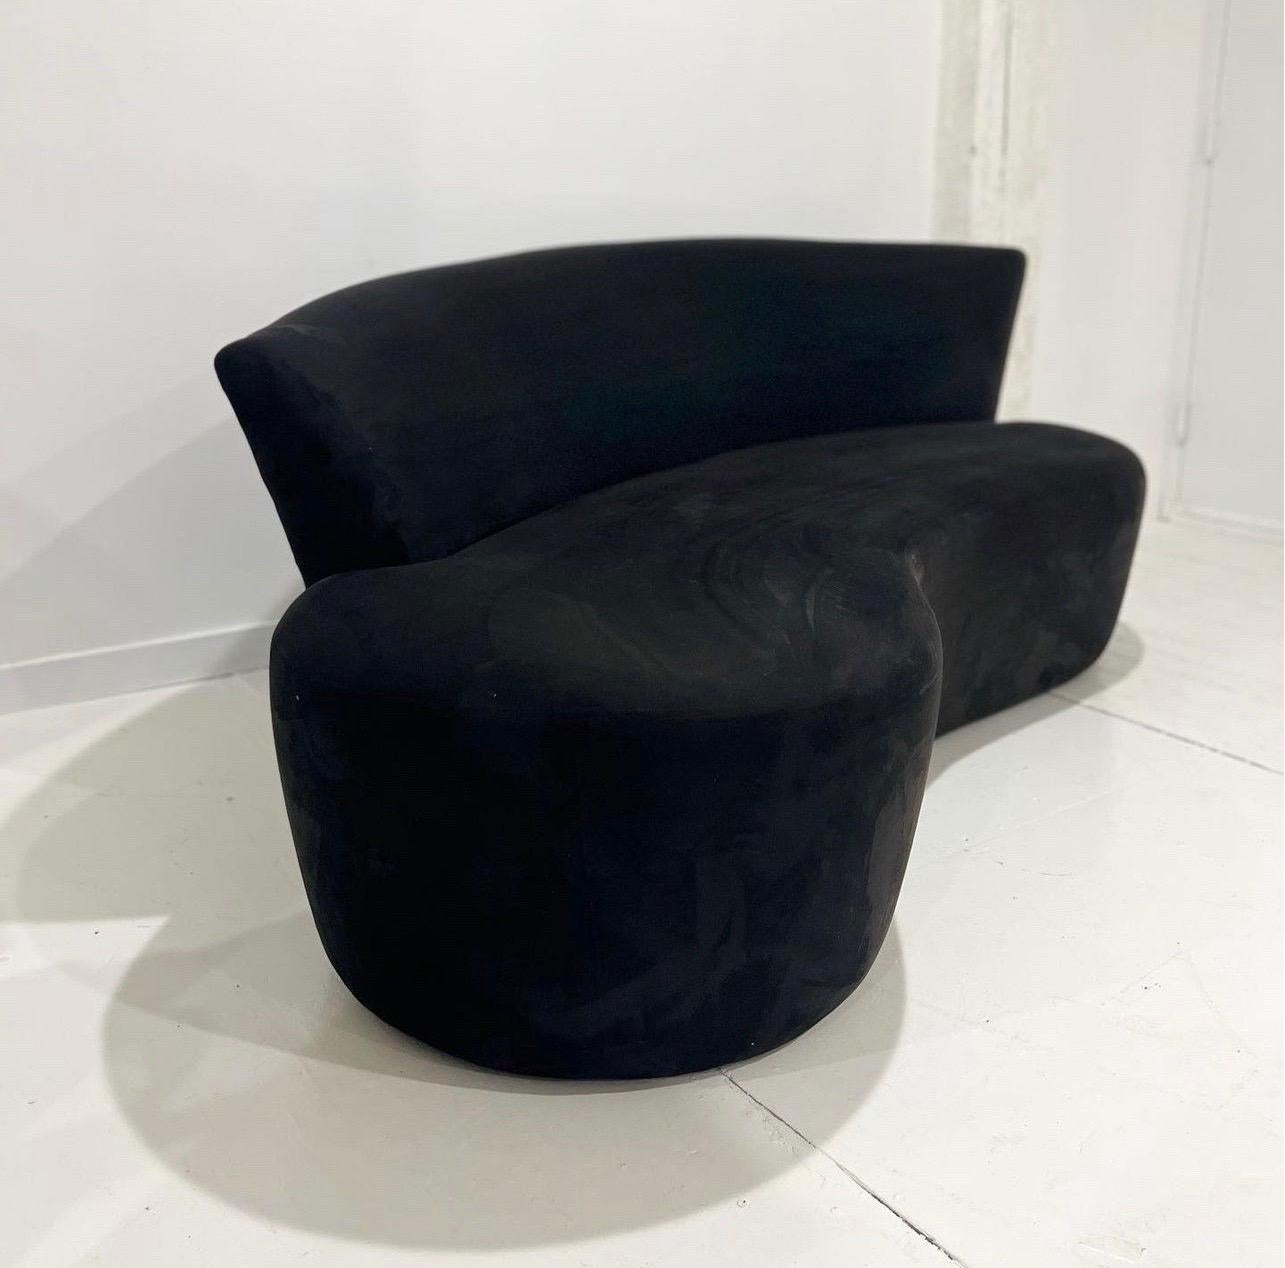 Vladimir Kagan for Weiman / Preview

This modern sculpted sofa features a flowing freeform backrest with unique cutaway style design. Upholstery is a black micro-suede. The sofa is in excellent condition! Absolutely no signs of wear and the